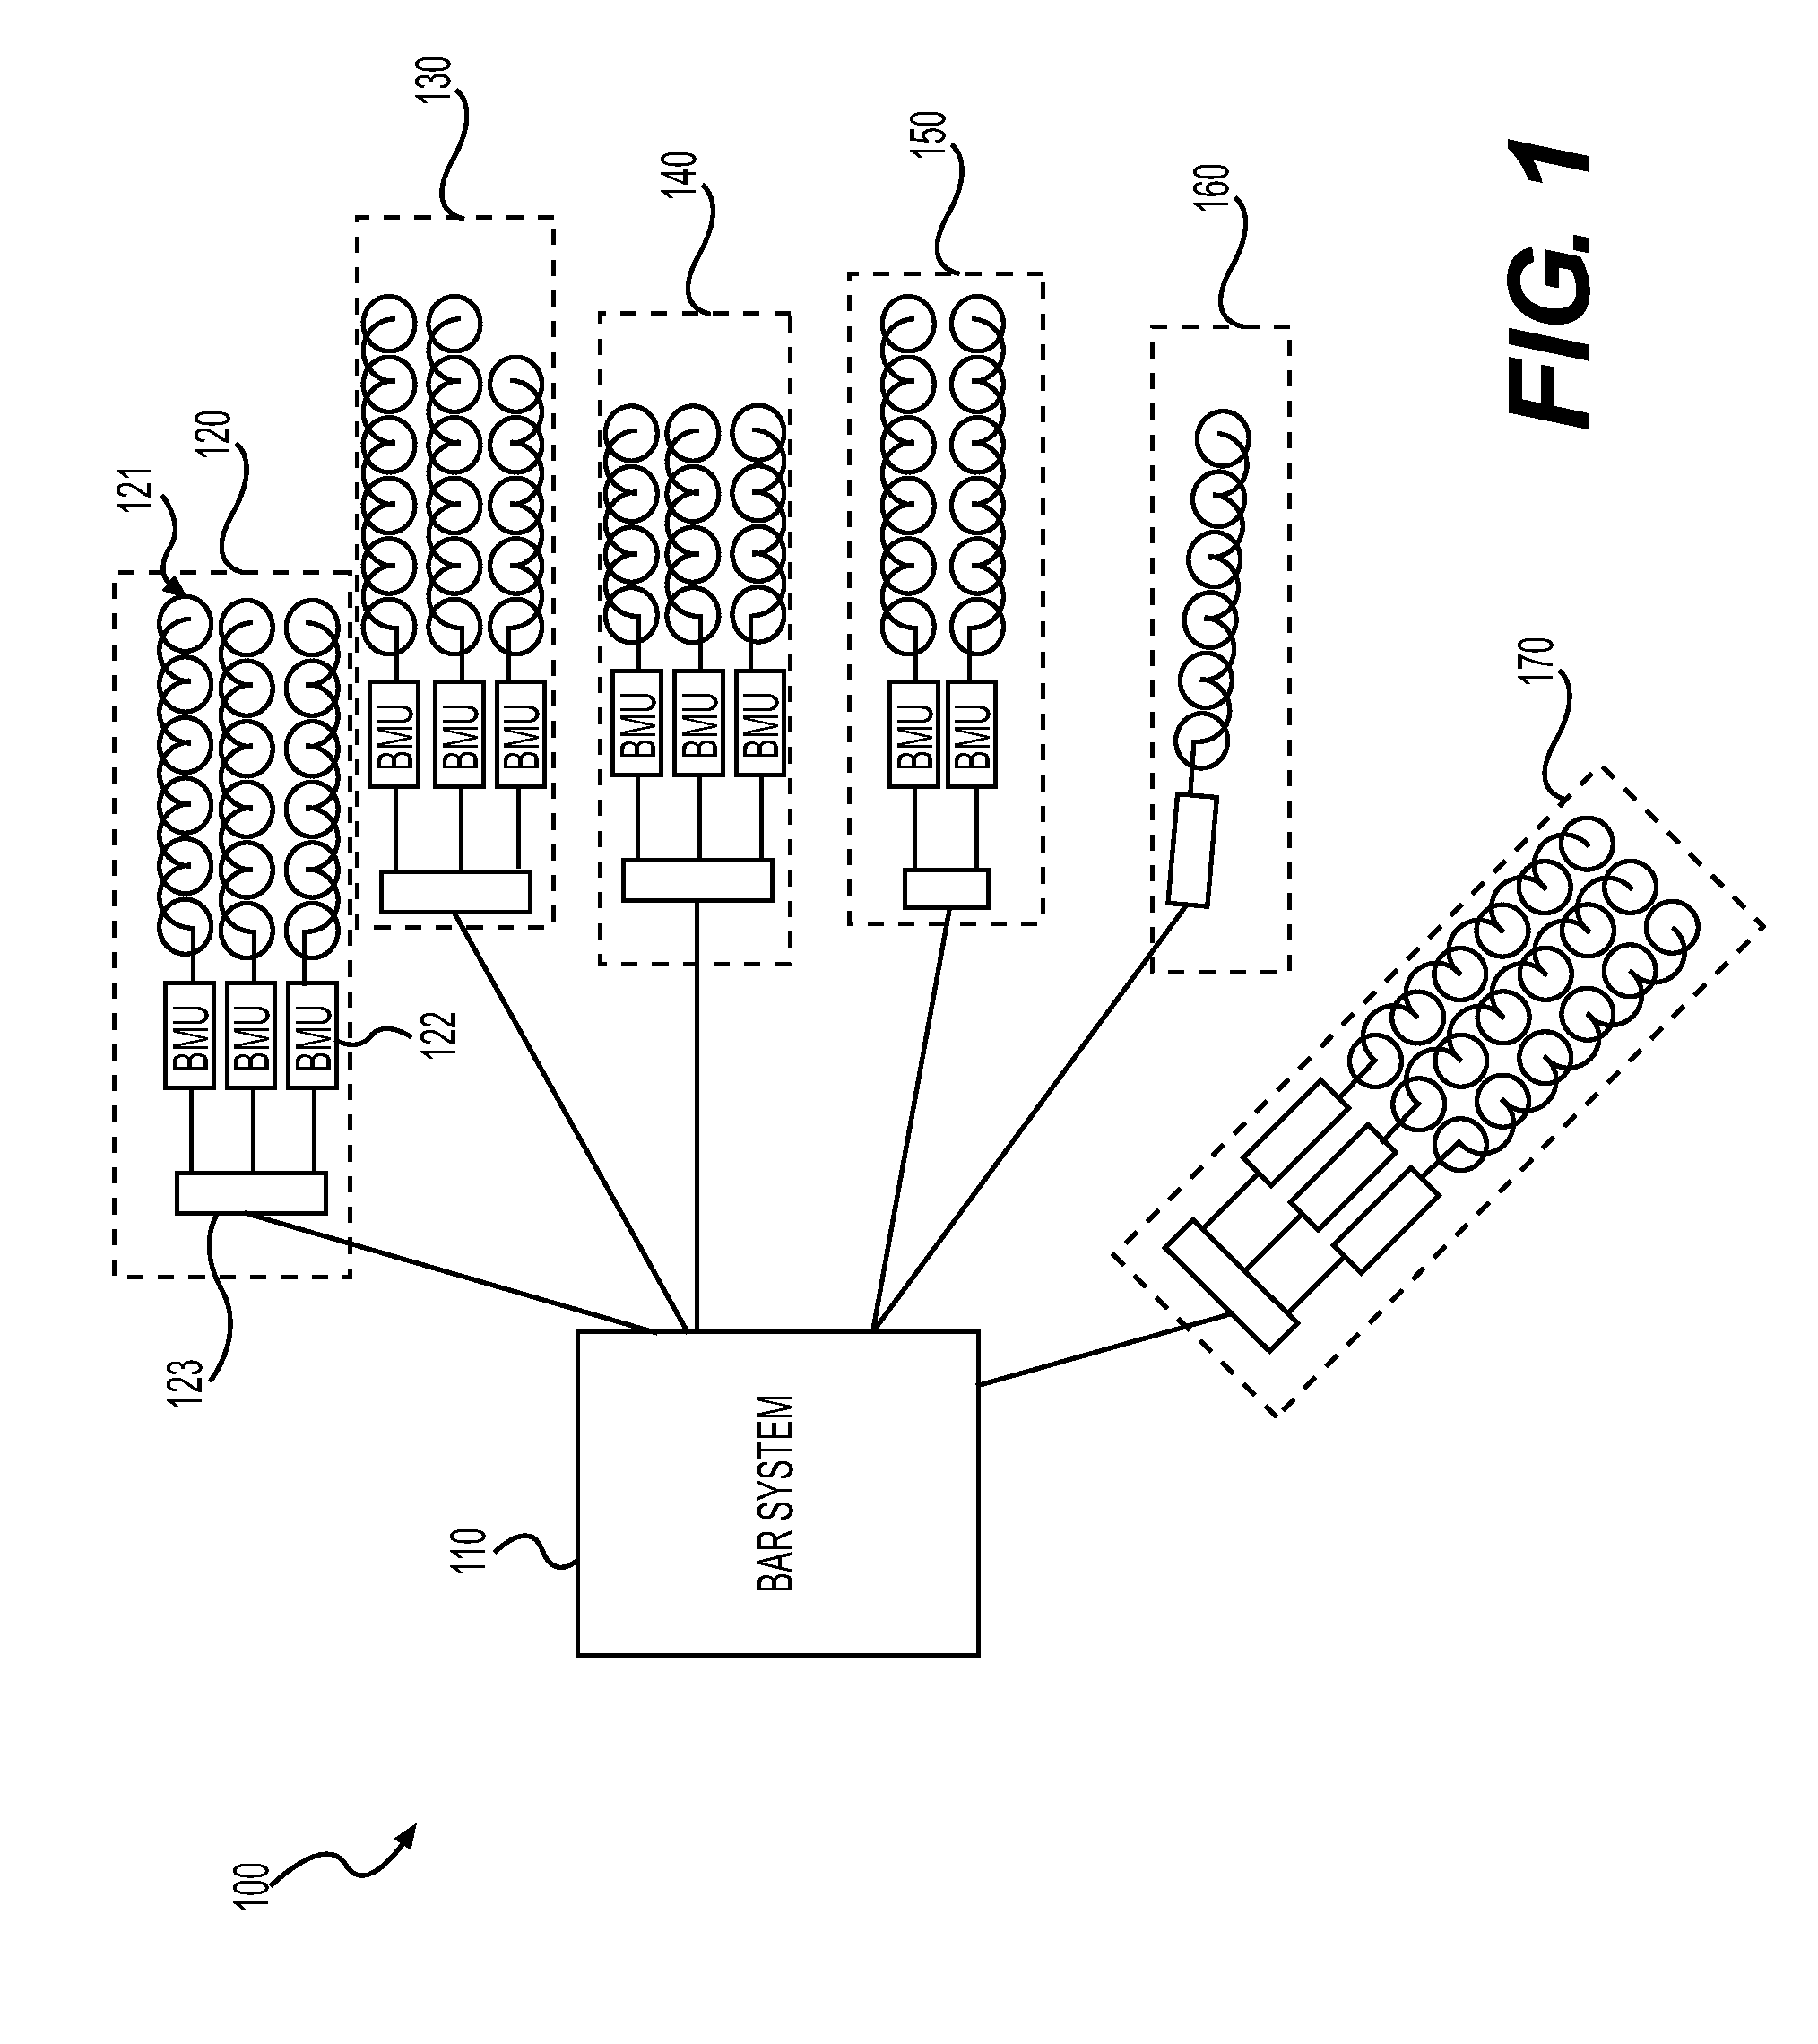 System and method for remote monitoring of battery condition